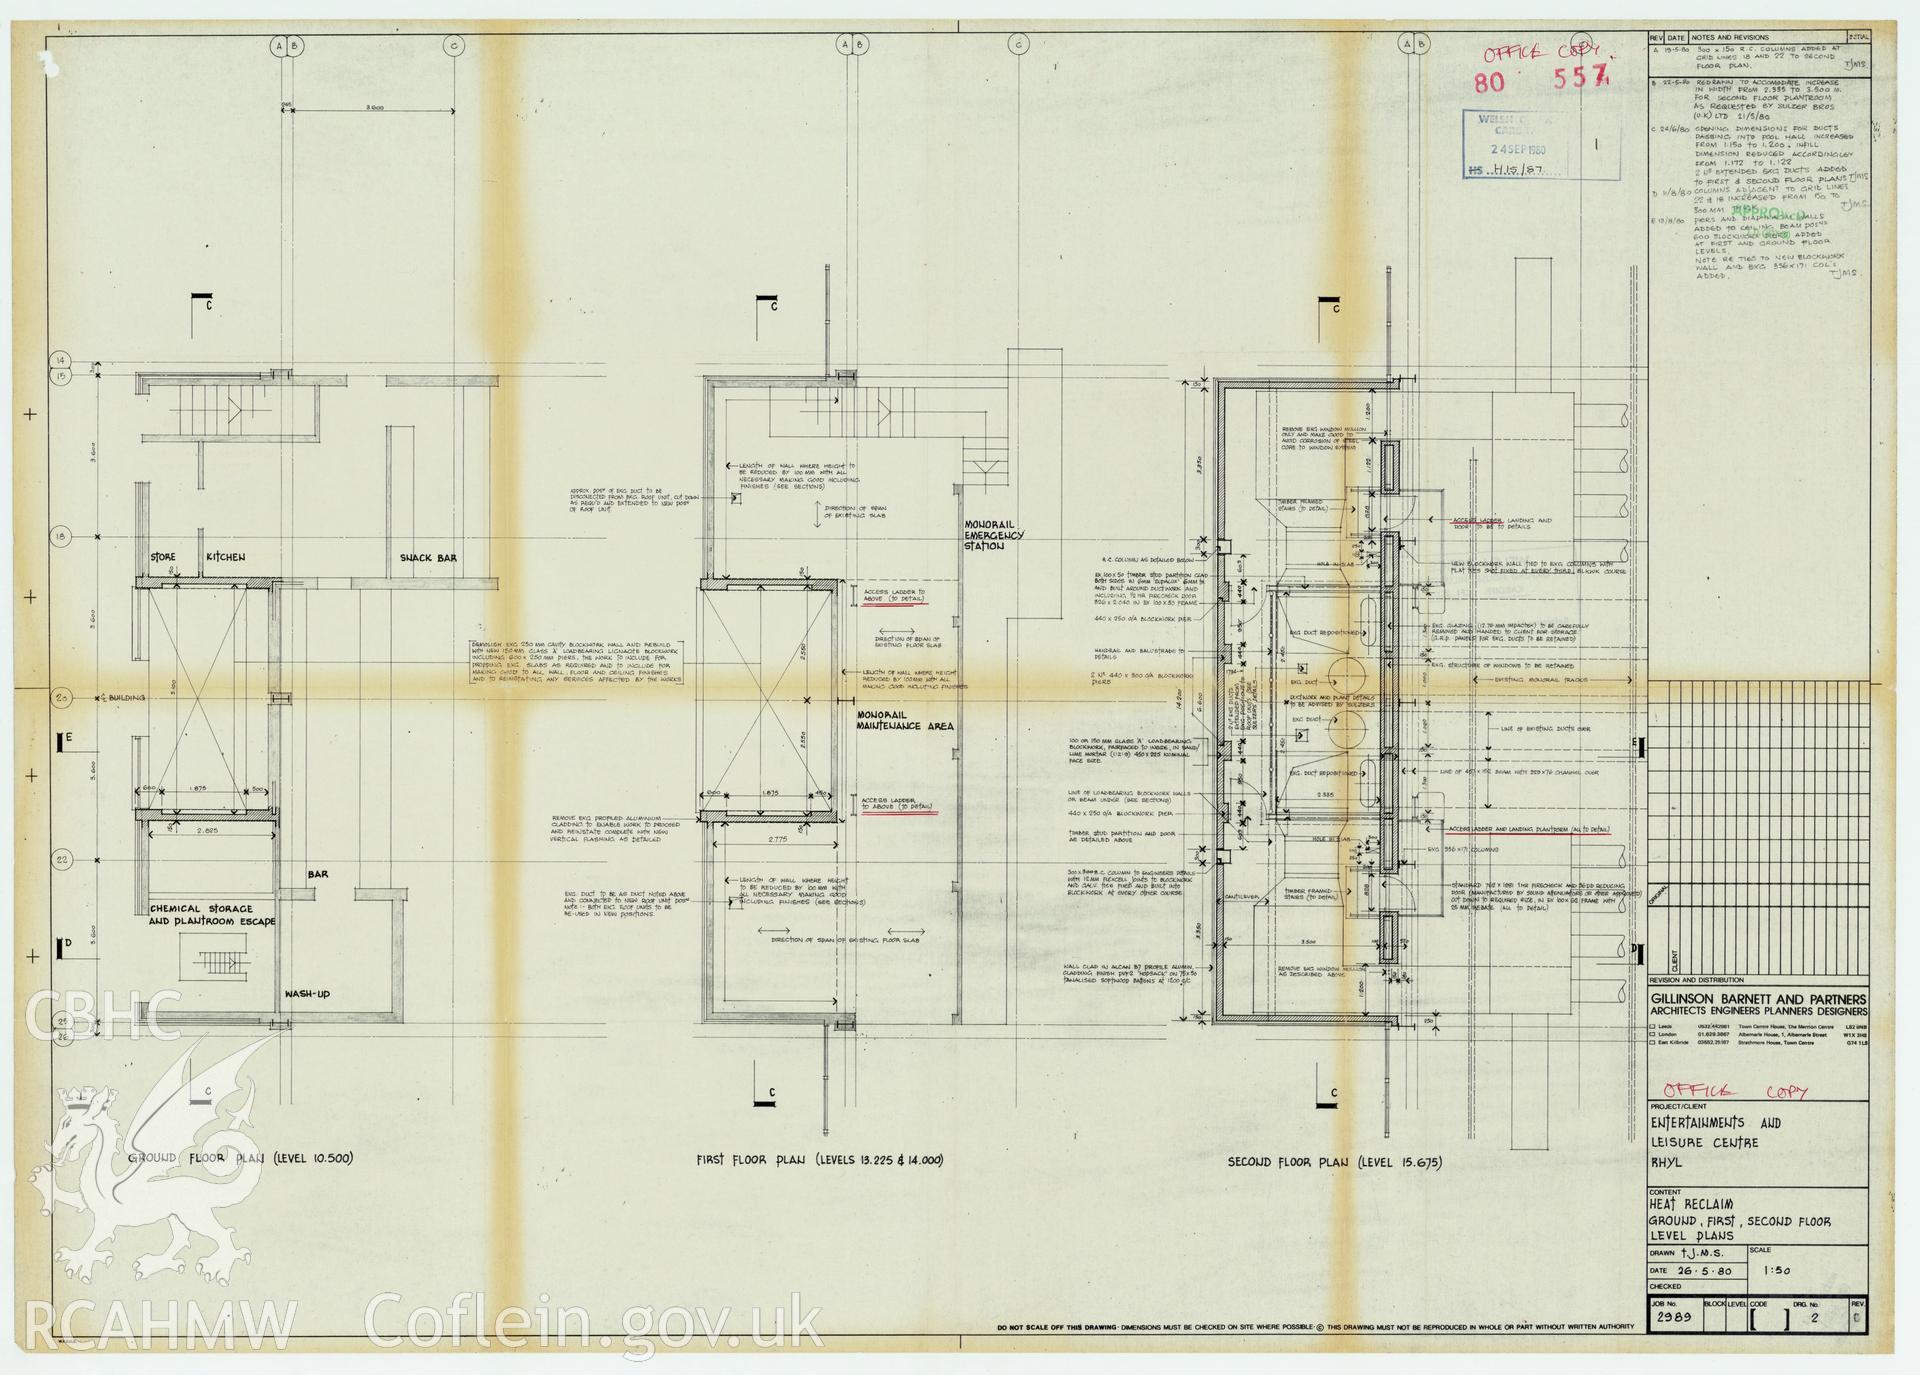 Digital copy of a measured drawing showing heat reclamation plan of ground, first and second of the entertainment complex at Rhyl Sun Centre and Theatre, produced by Gillinson Barnett & Partners  1980. Loaned for copying by Denbighshire County Council.